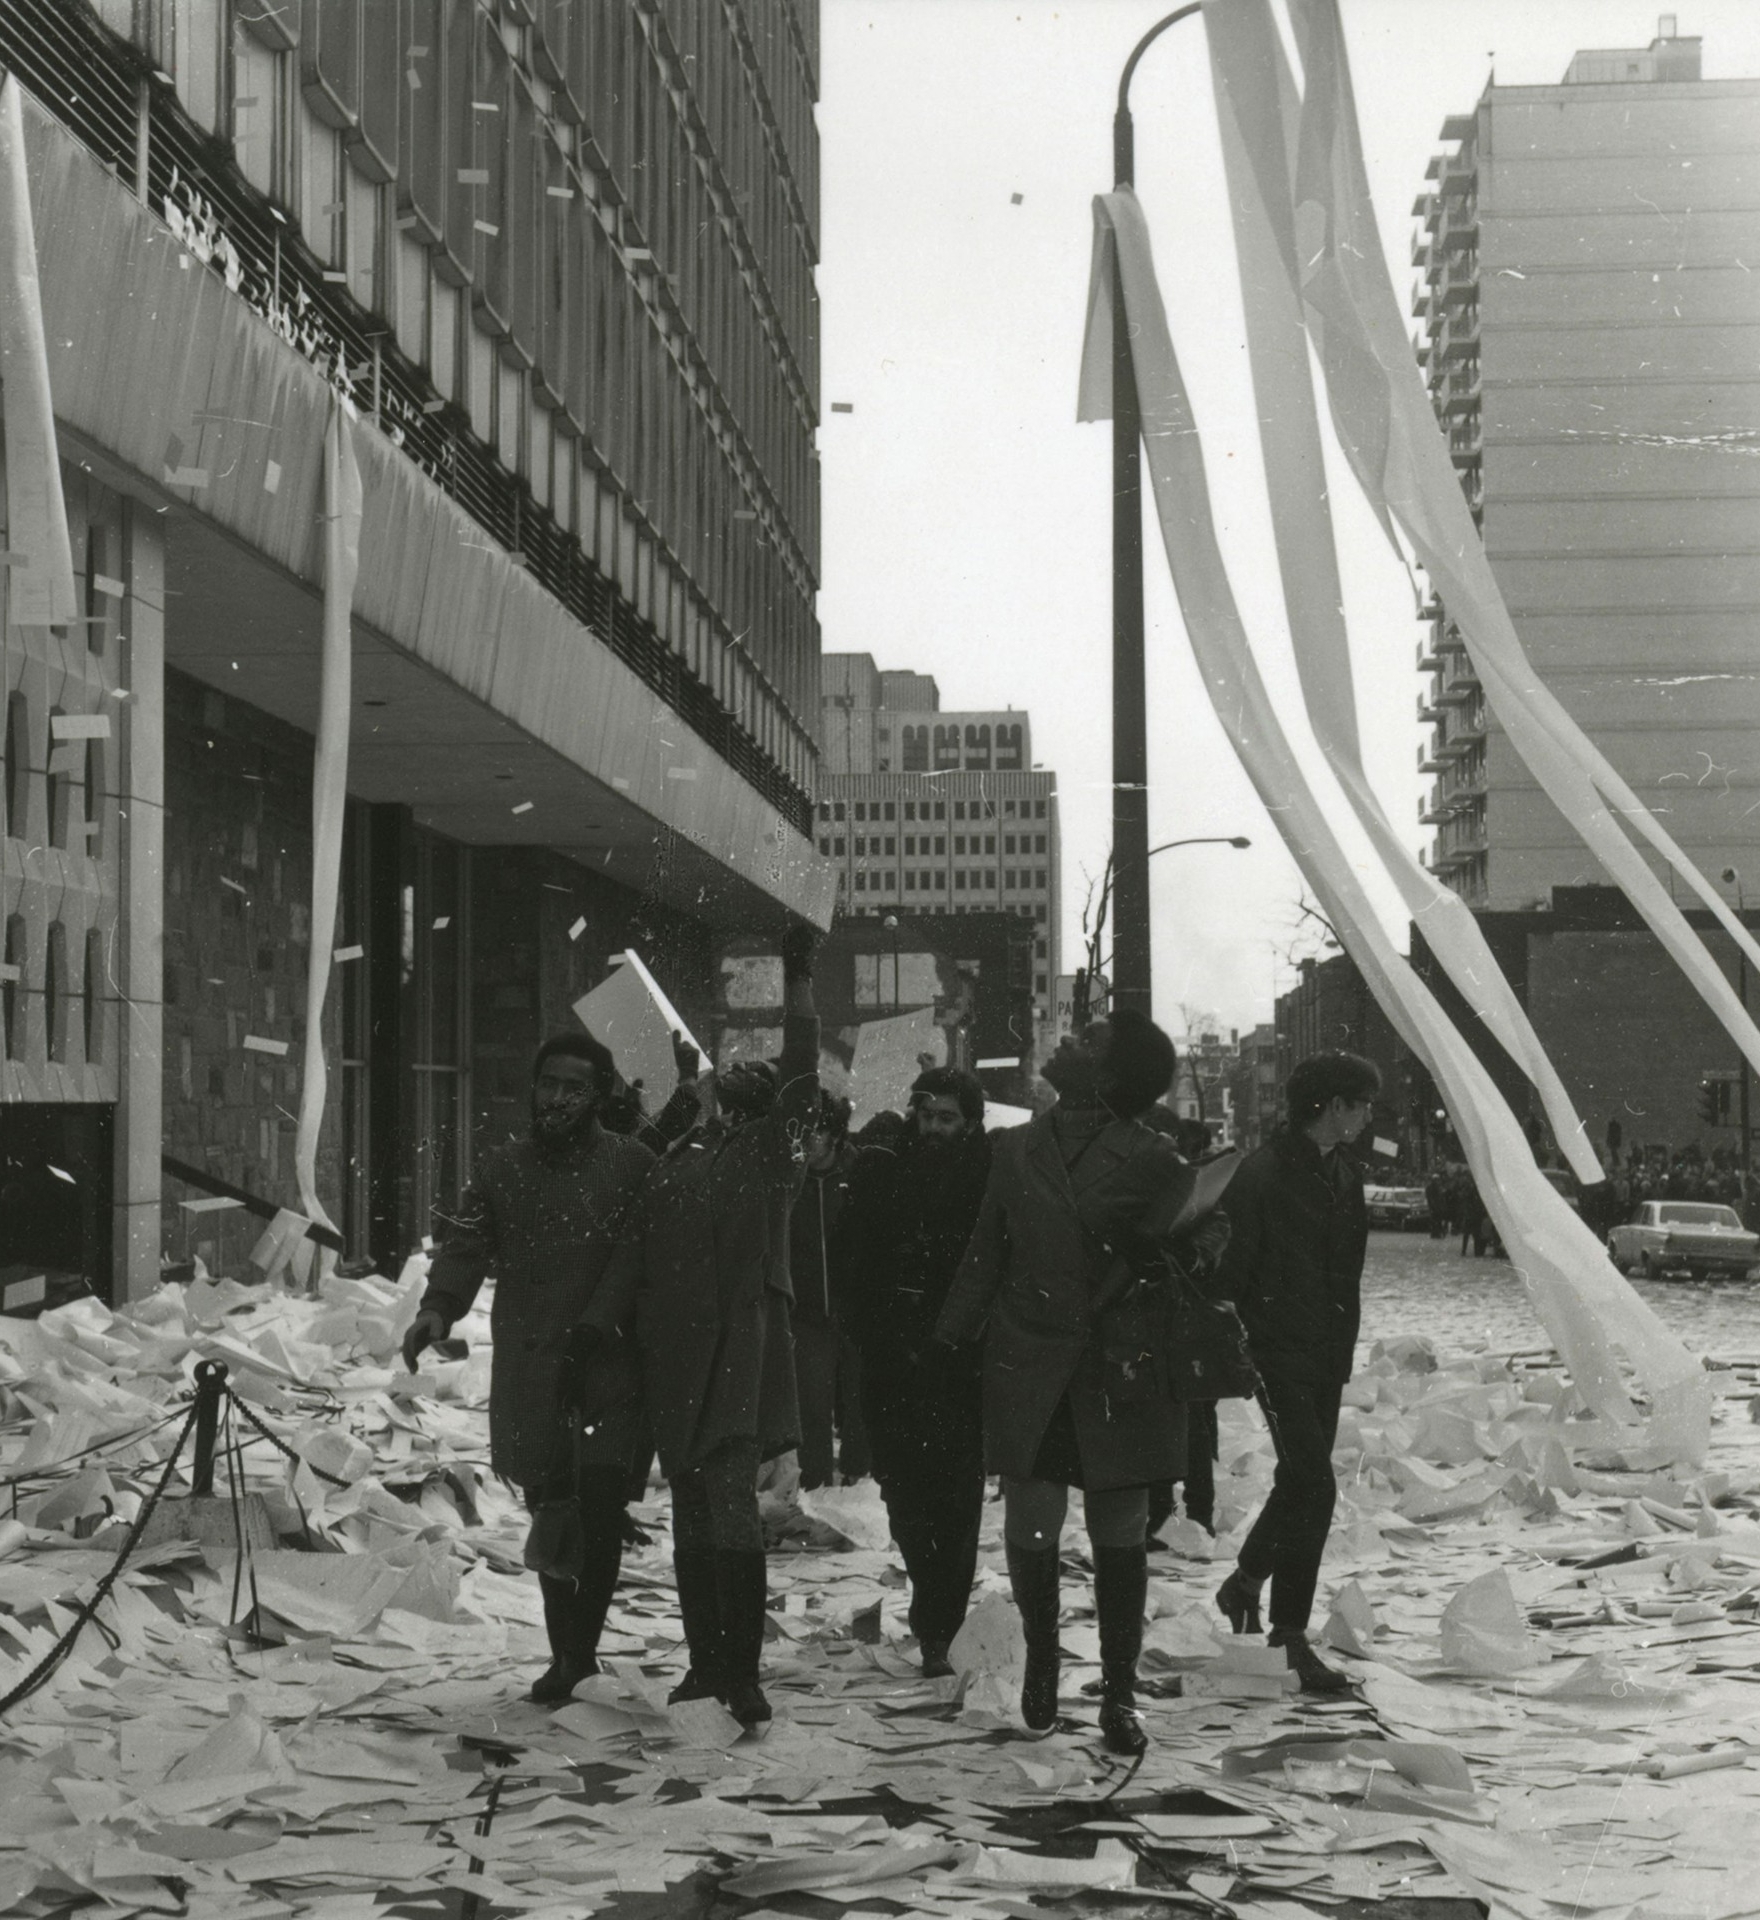 Students protesting outside of the Concordia Hall building in downtown Montreal.